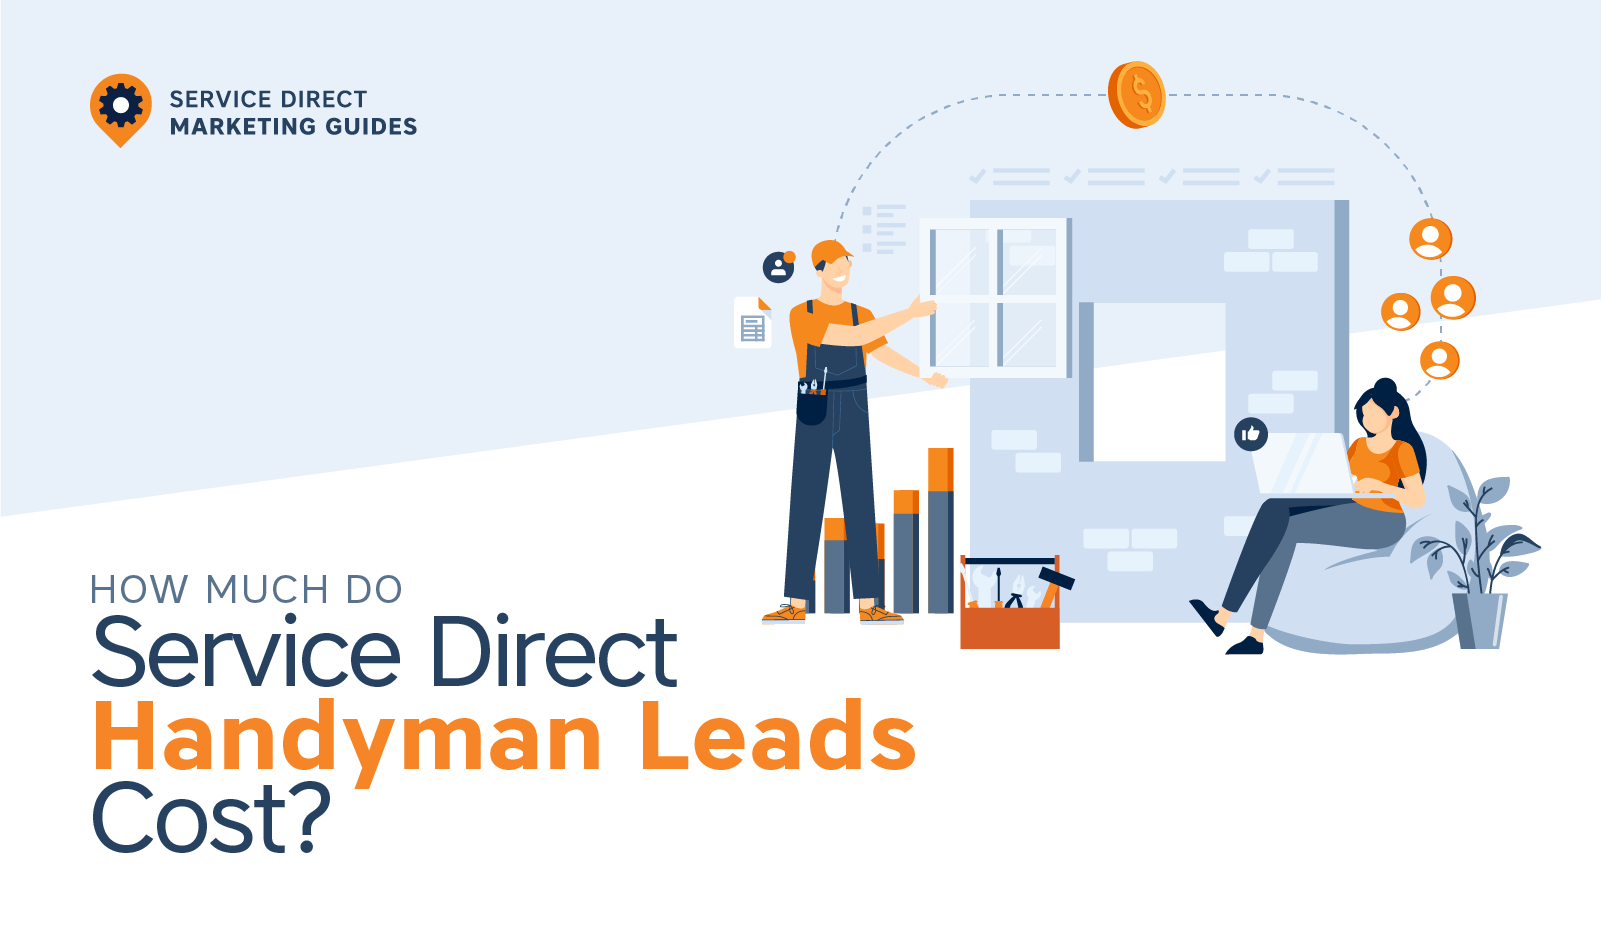 How Much Do Service Direct Handyman Leads Cost?